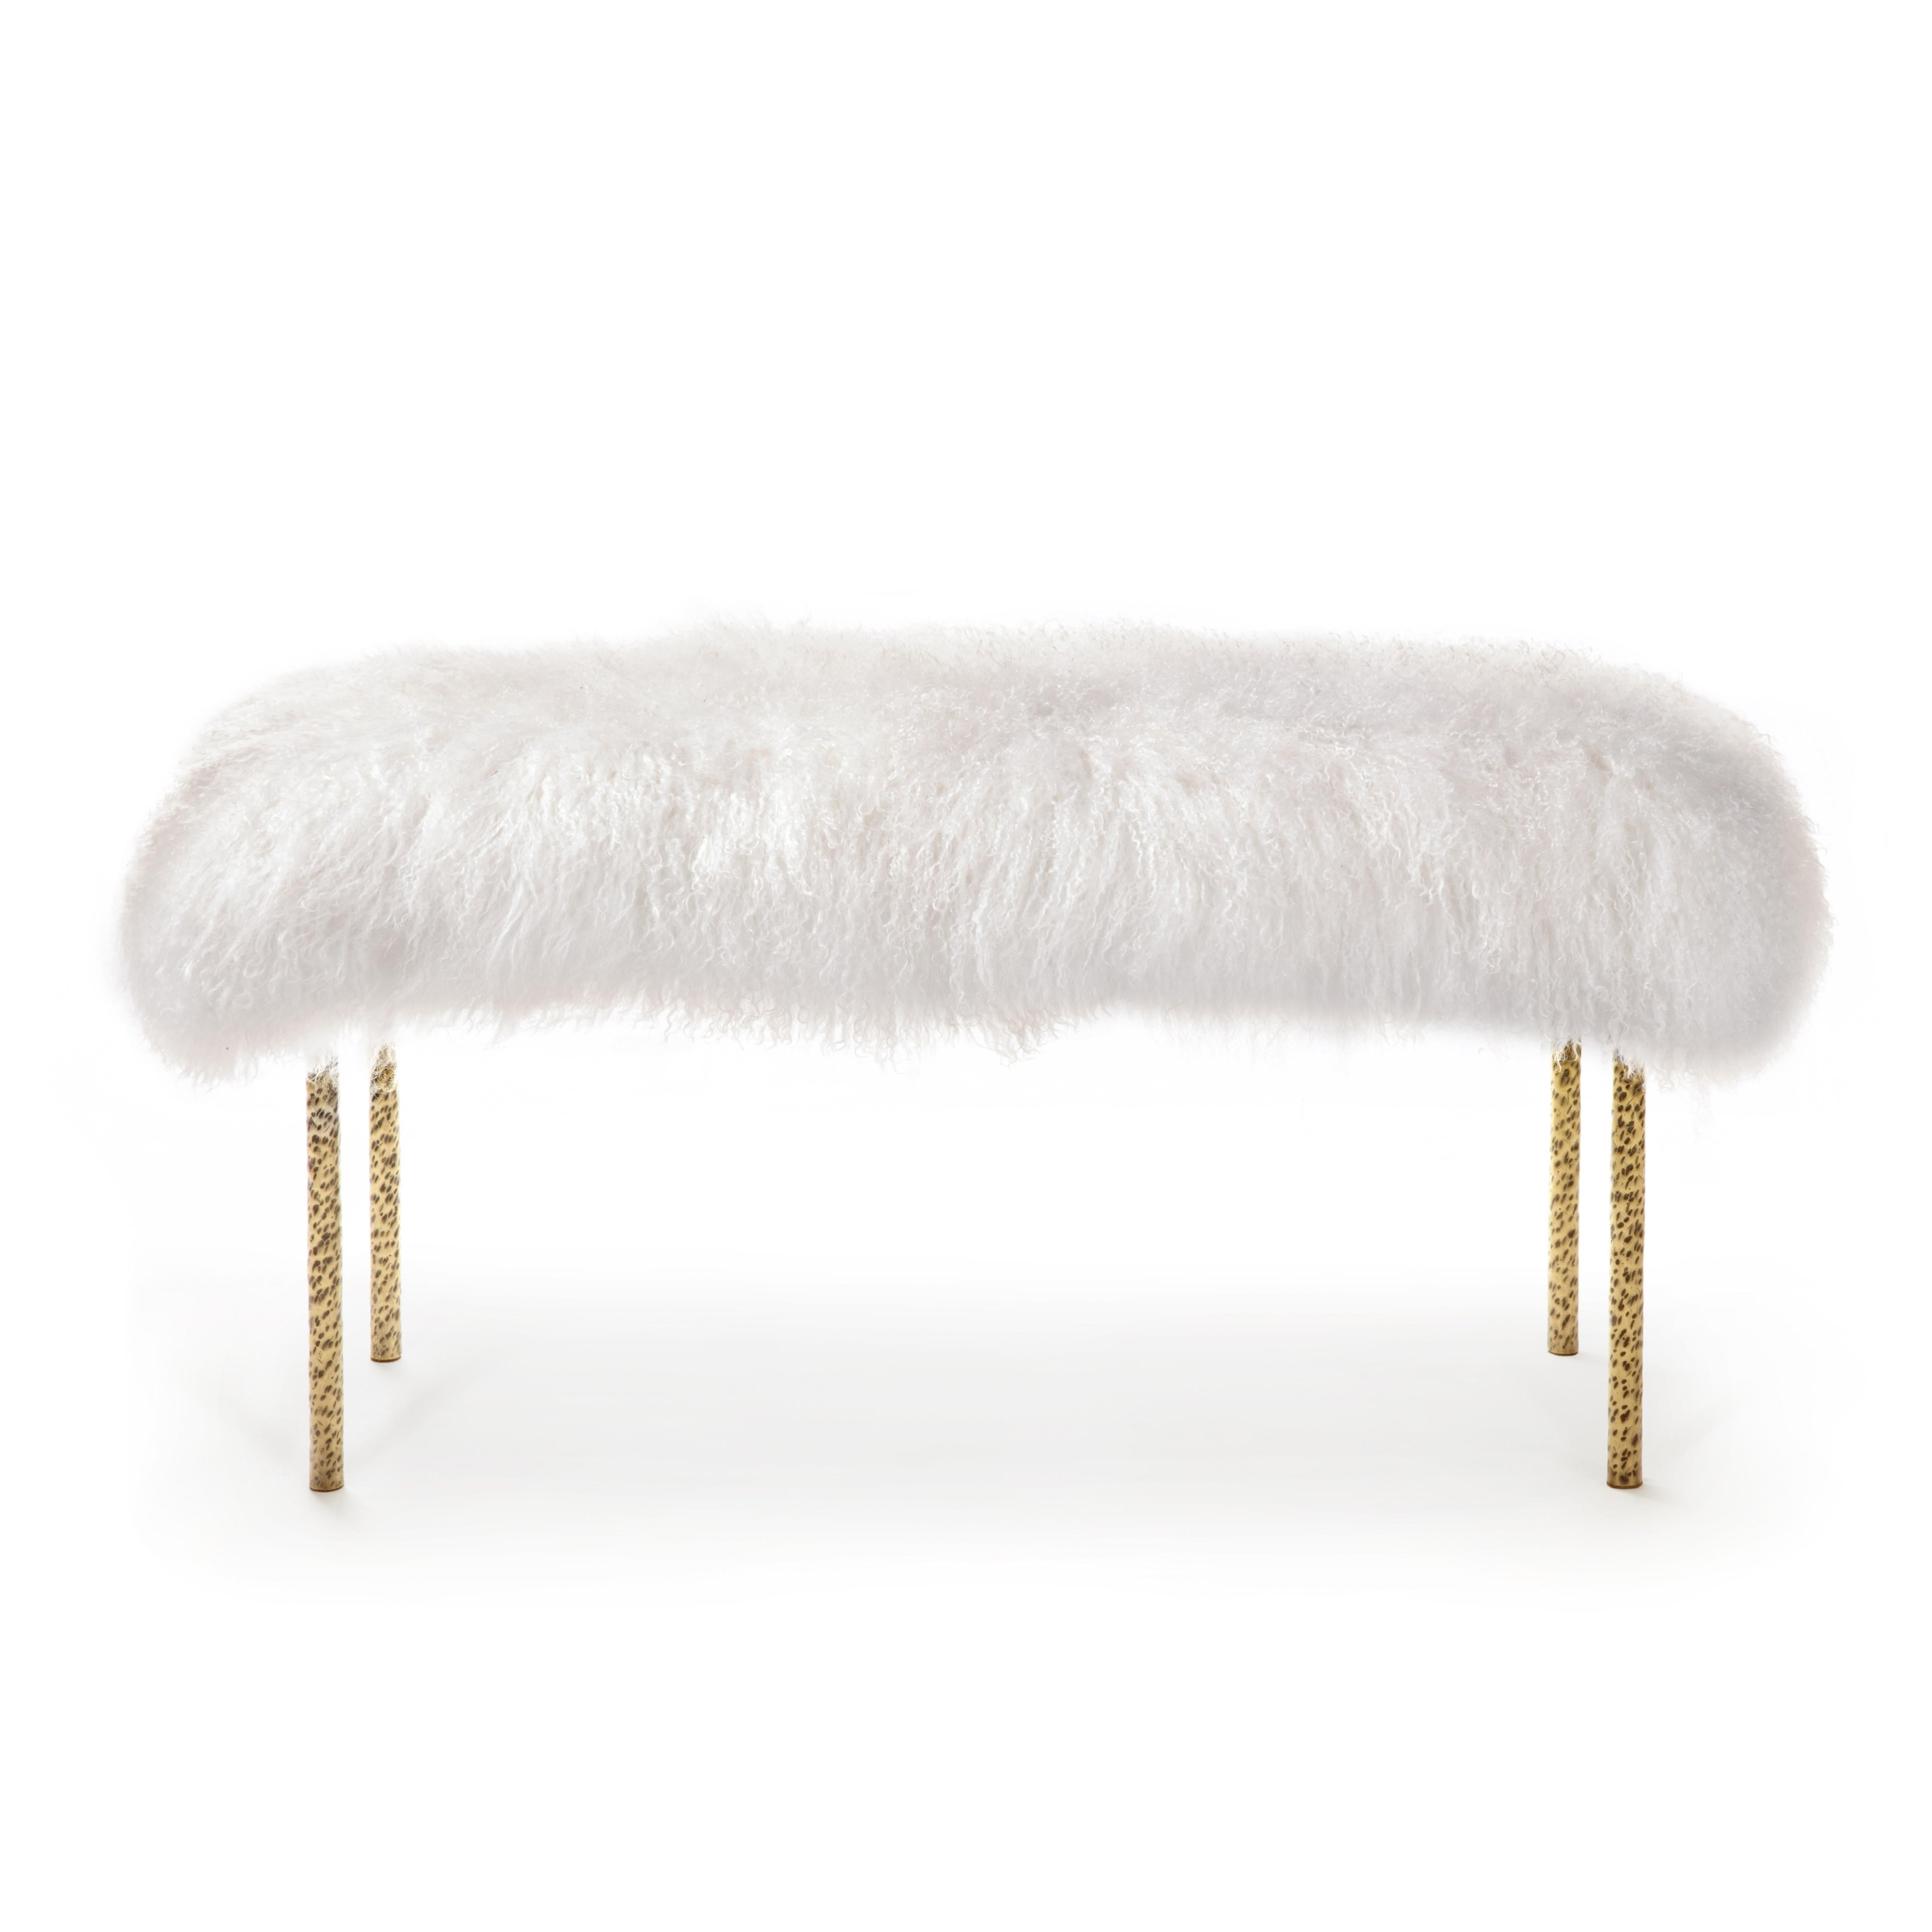 The Tree Branches long bench is entirely handcrafted in brass with a hammered technique similar to the irregular details of real branches.
The top in Mongolian Lamb fur completes this creation by evoking the wild side of nature. Thought to be